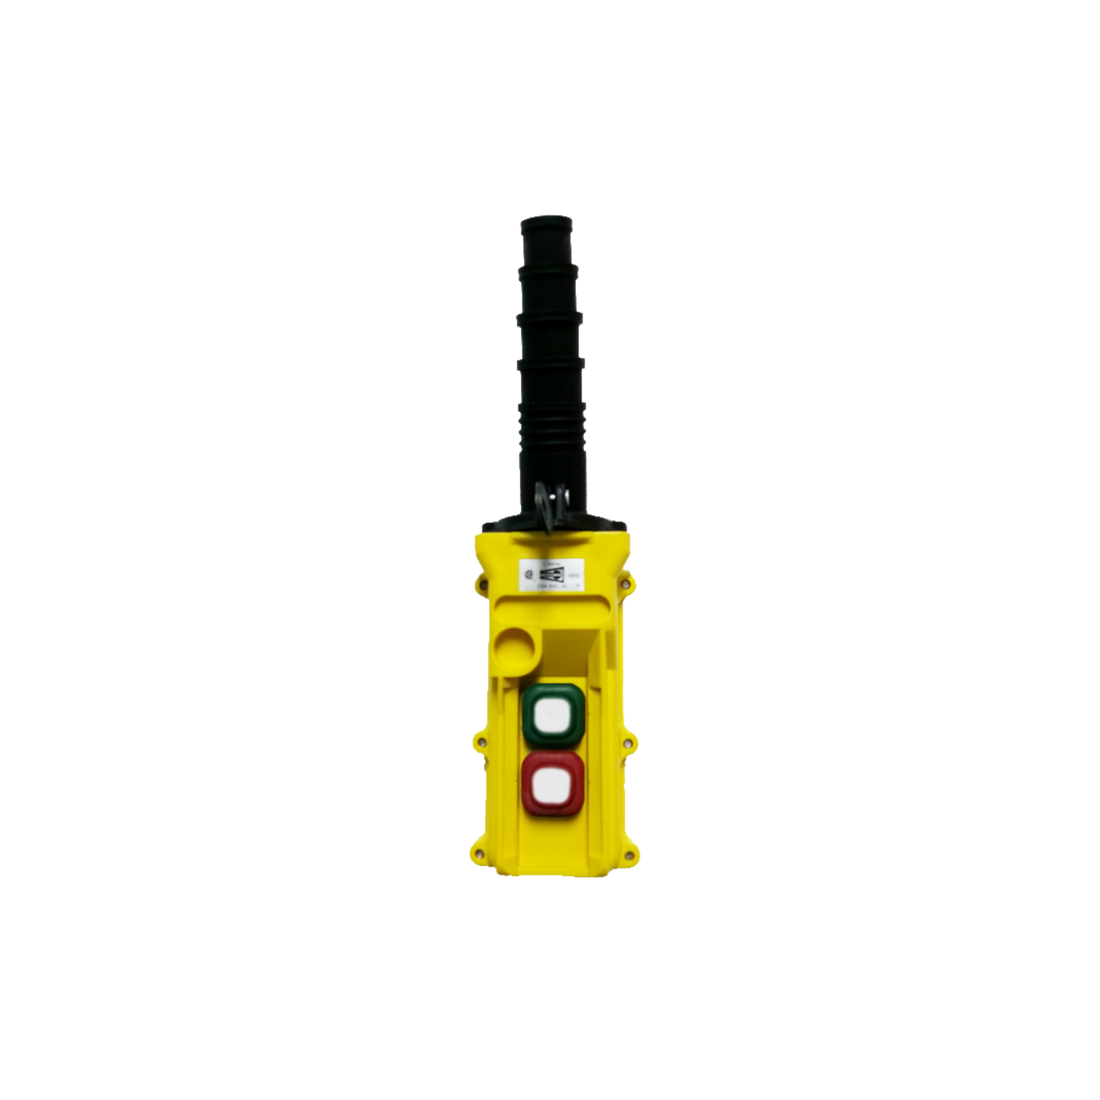 2-Button Pendant, Maintained & Momentary On/Off Switches (L2-S-A, L2-S-M); Color: Yellow